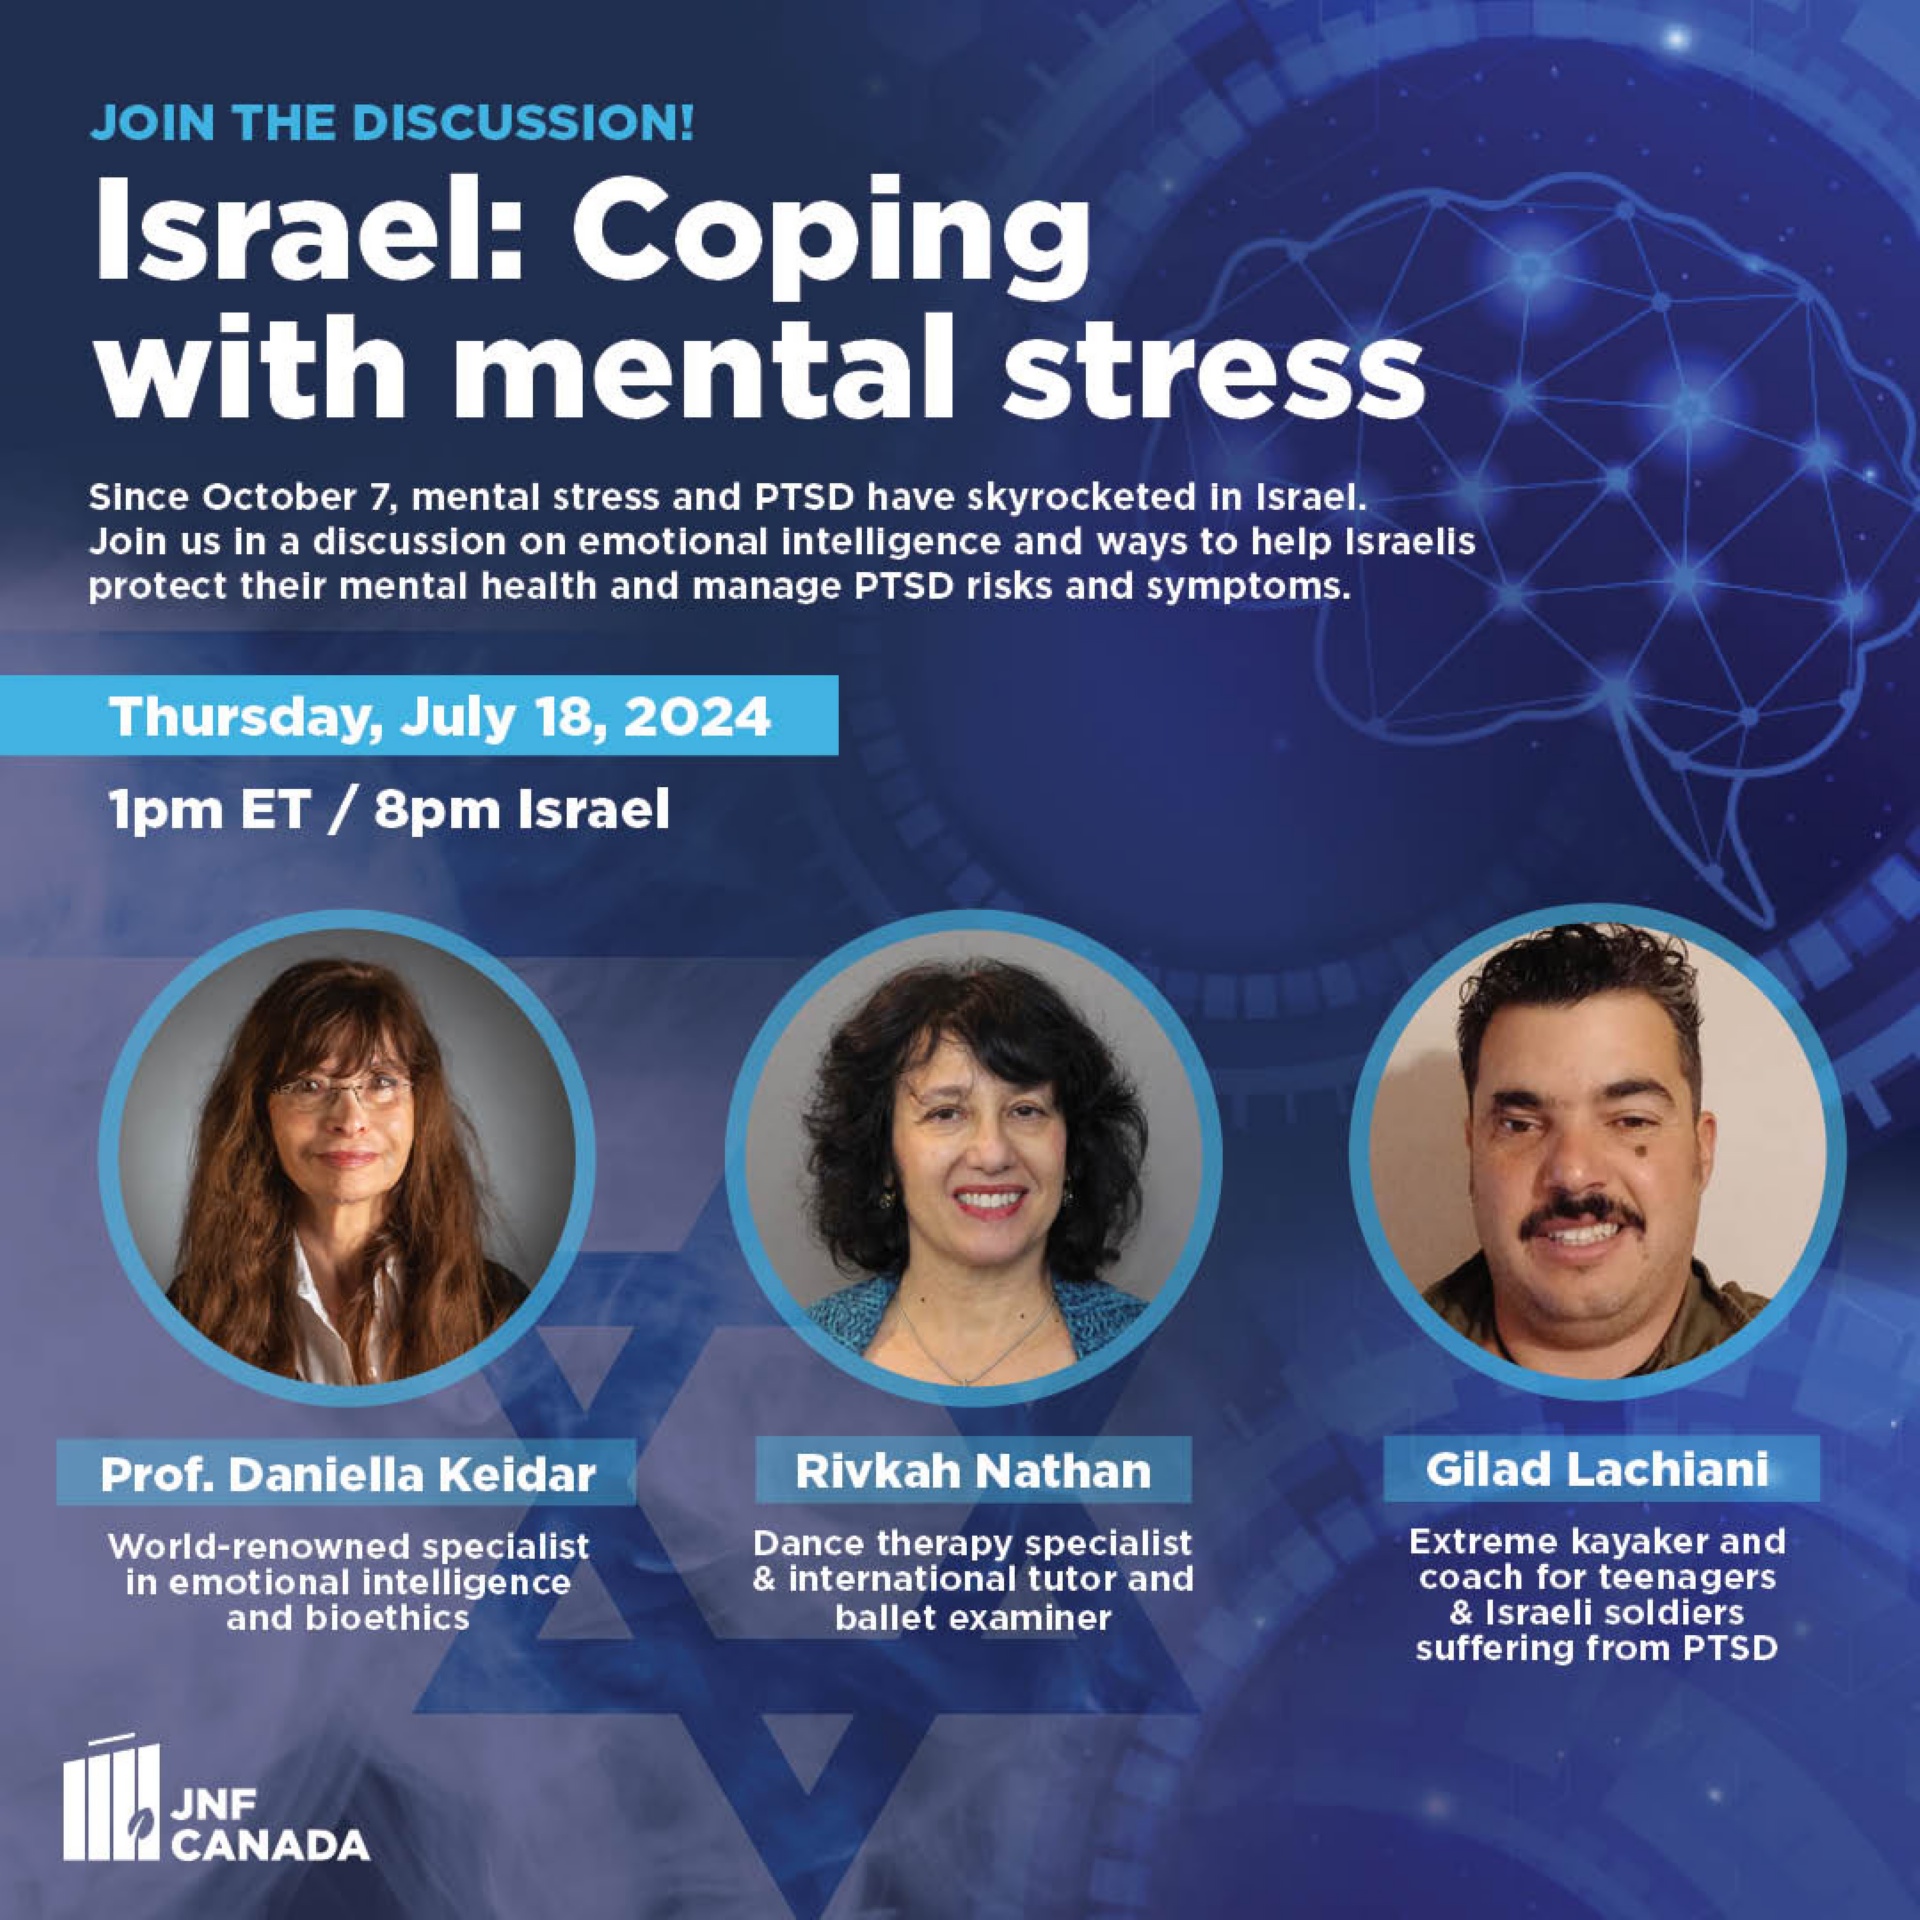 Israel: Coping with mental stress